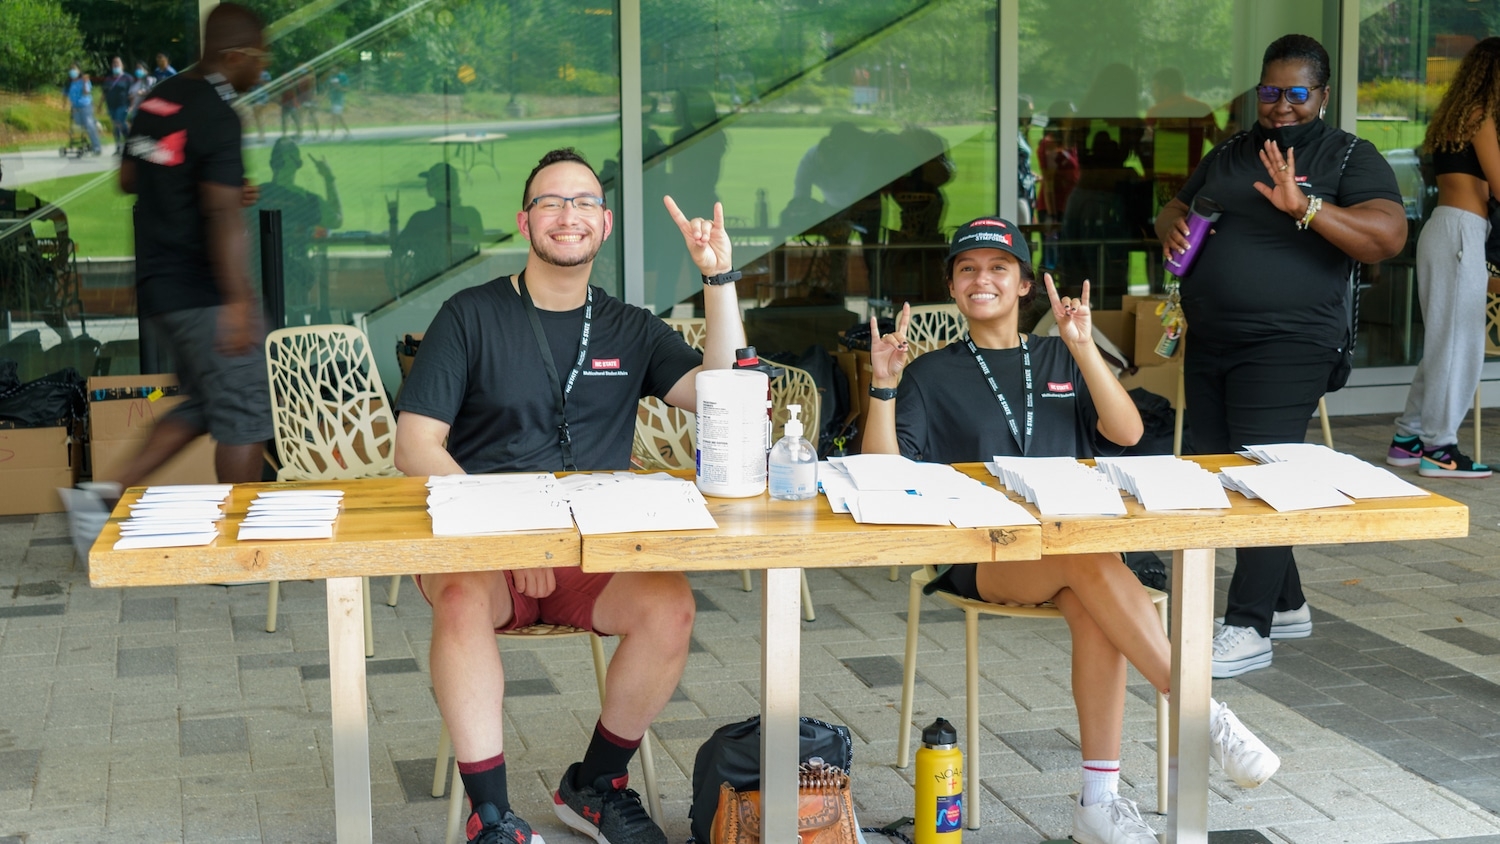 Three people wearing Symposium t-shirts smile at the camera and throw up wolfies while they wait to welcome incoming students.